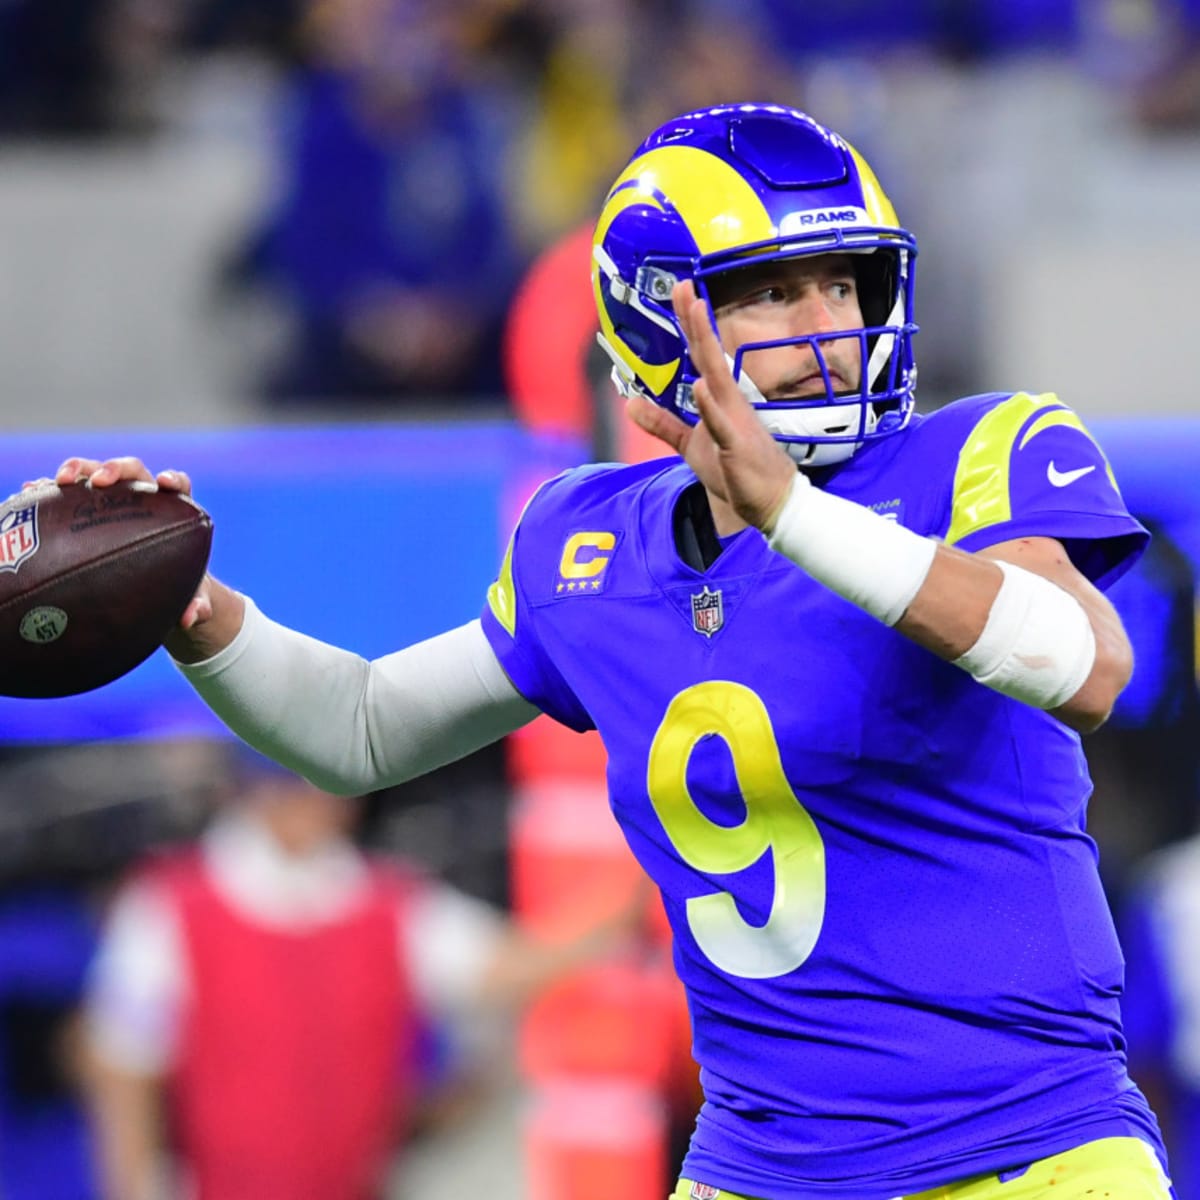 Rams' Stafford hopes to follow in friend Kershaw's footsteps – KGET 17